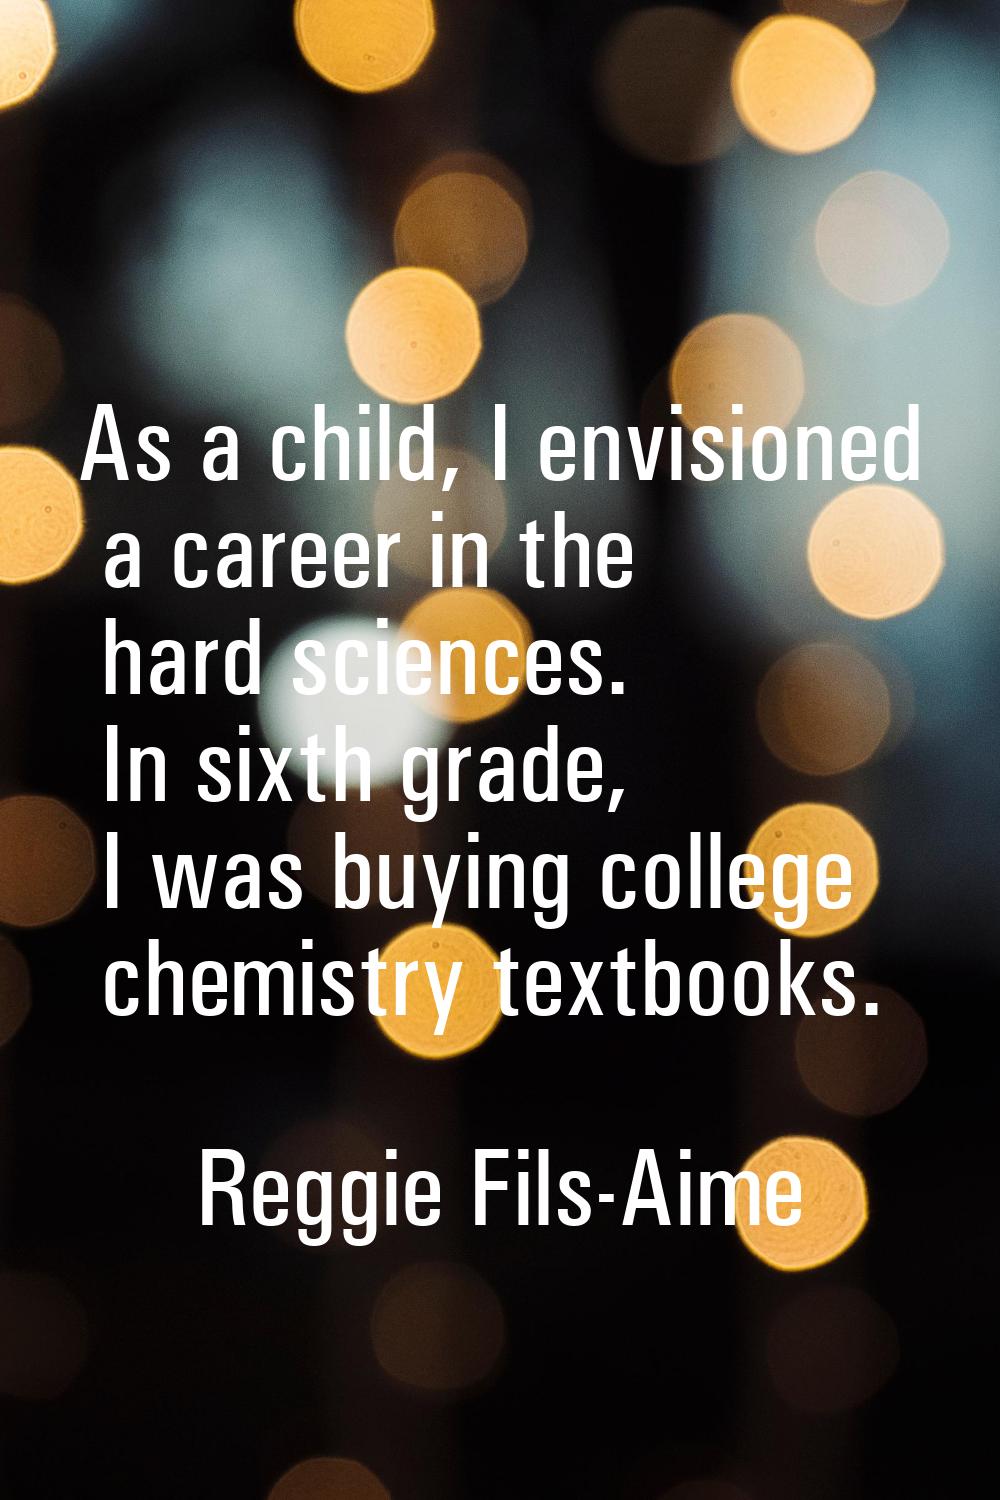 As a child, I envisioned a career in the hard sciences. In sixth grade, I was buying college chemis